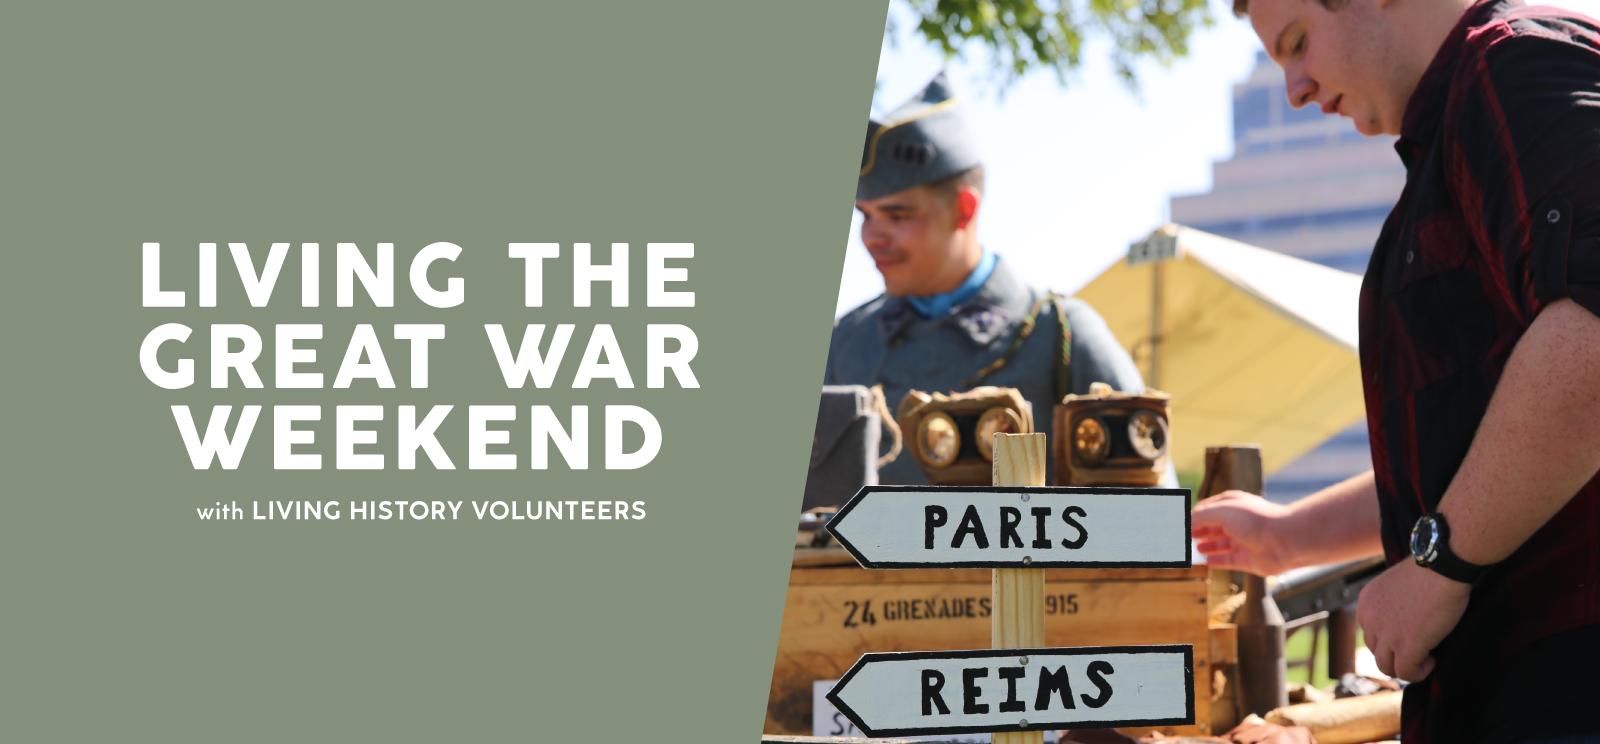 Image: Modern photograph of a white man looking at WWI artifacts and trench signs pointing to Paris on a table. Another man in WWI uniform stands behind the table. Text: Living the Great War Weekend